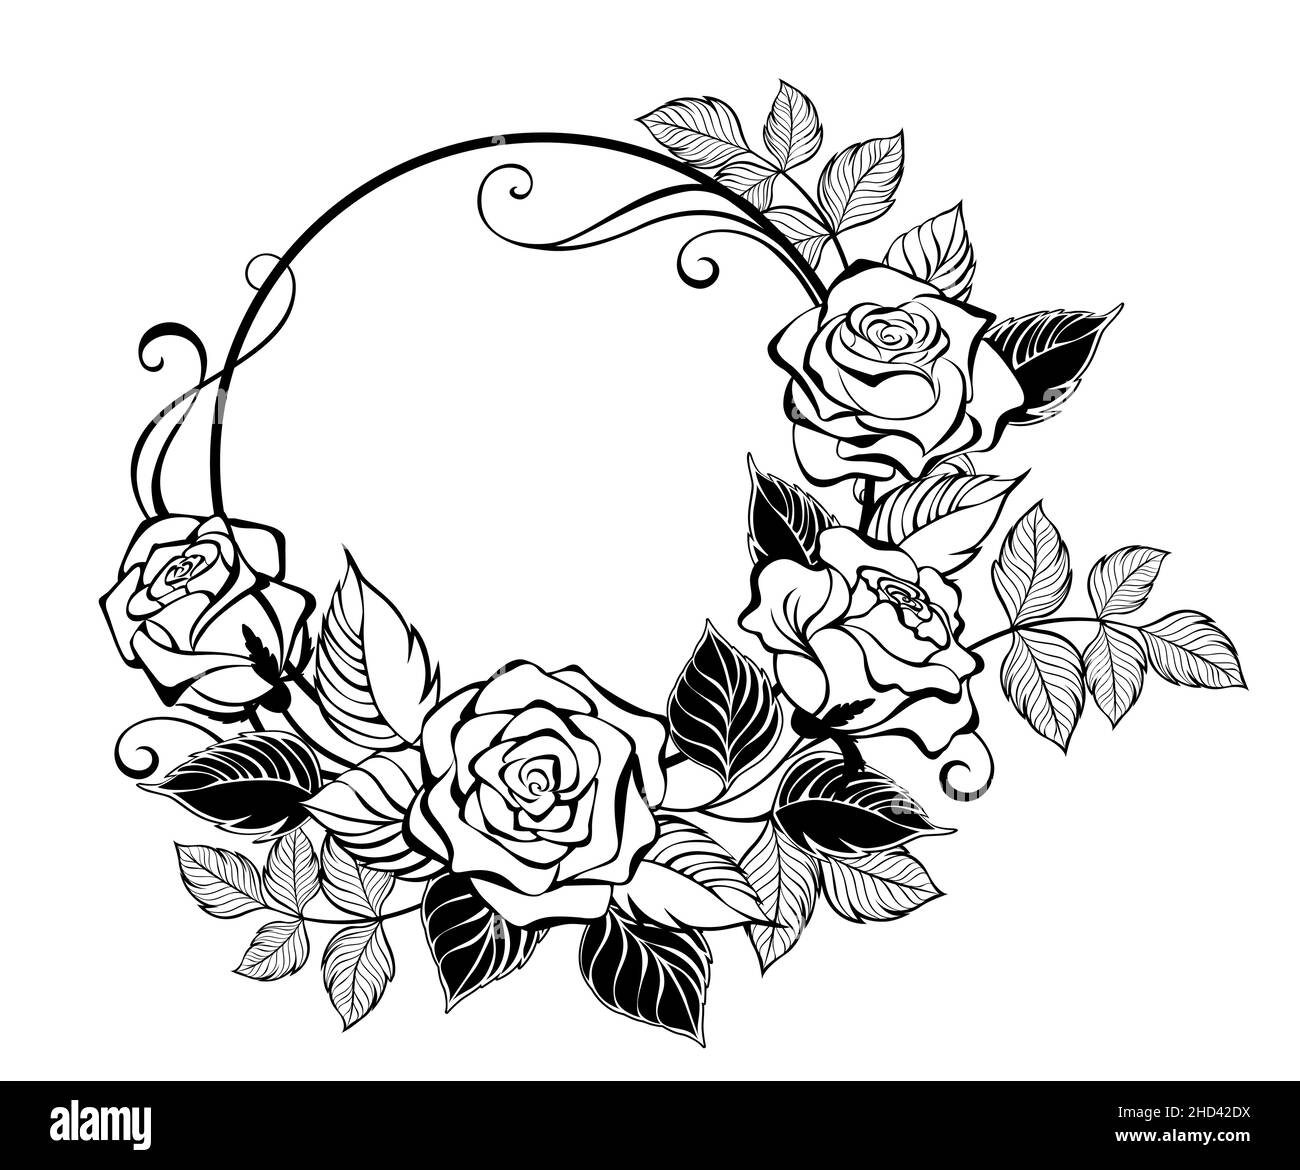 Round frame, decorated with outline, artistically drawn branch of rose with stylized leaves on white background. Contour rose. Stock Vector